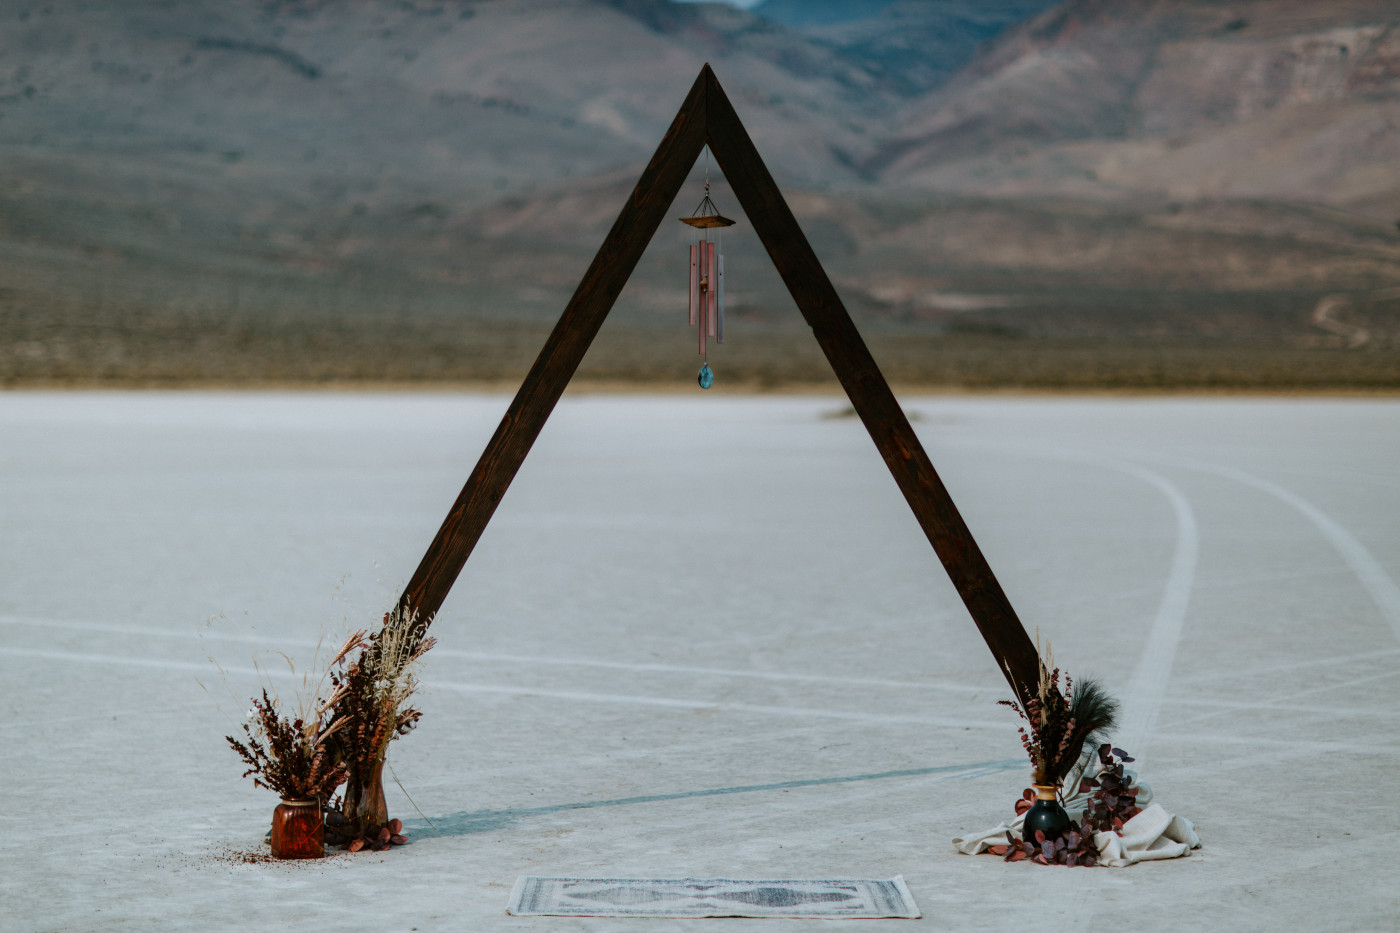 The A frame altar sits in the Alvord Desert.